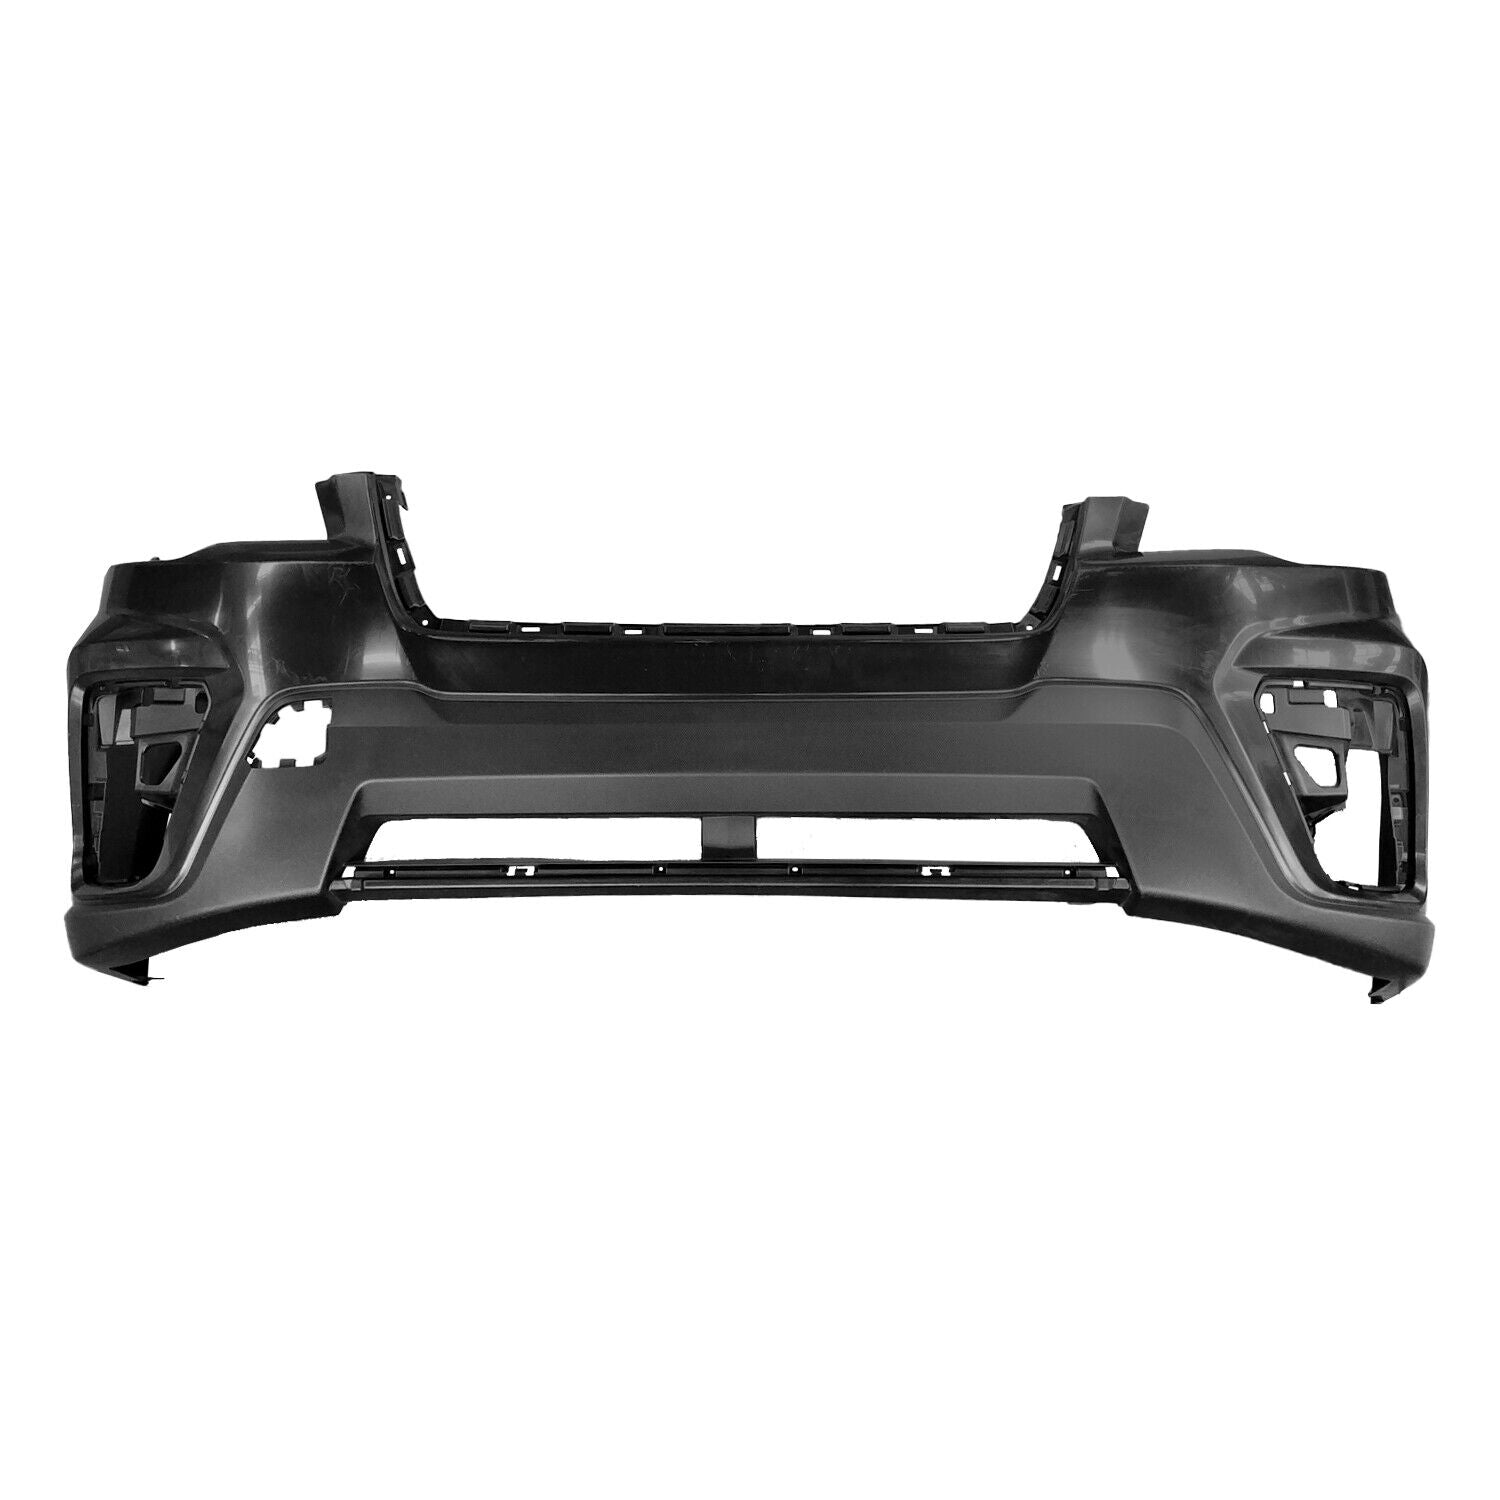 2019-2020 SUBARU FORESTER; Front Bumper Cover; Partial / Painted to Match